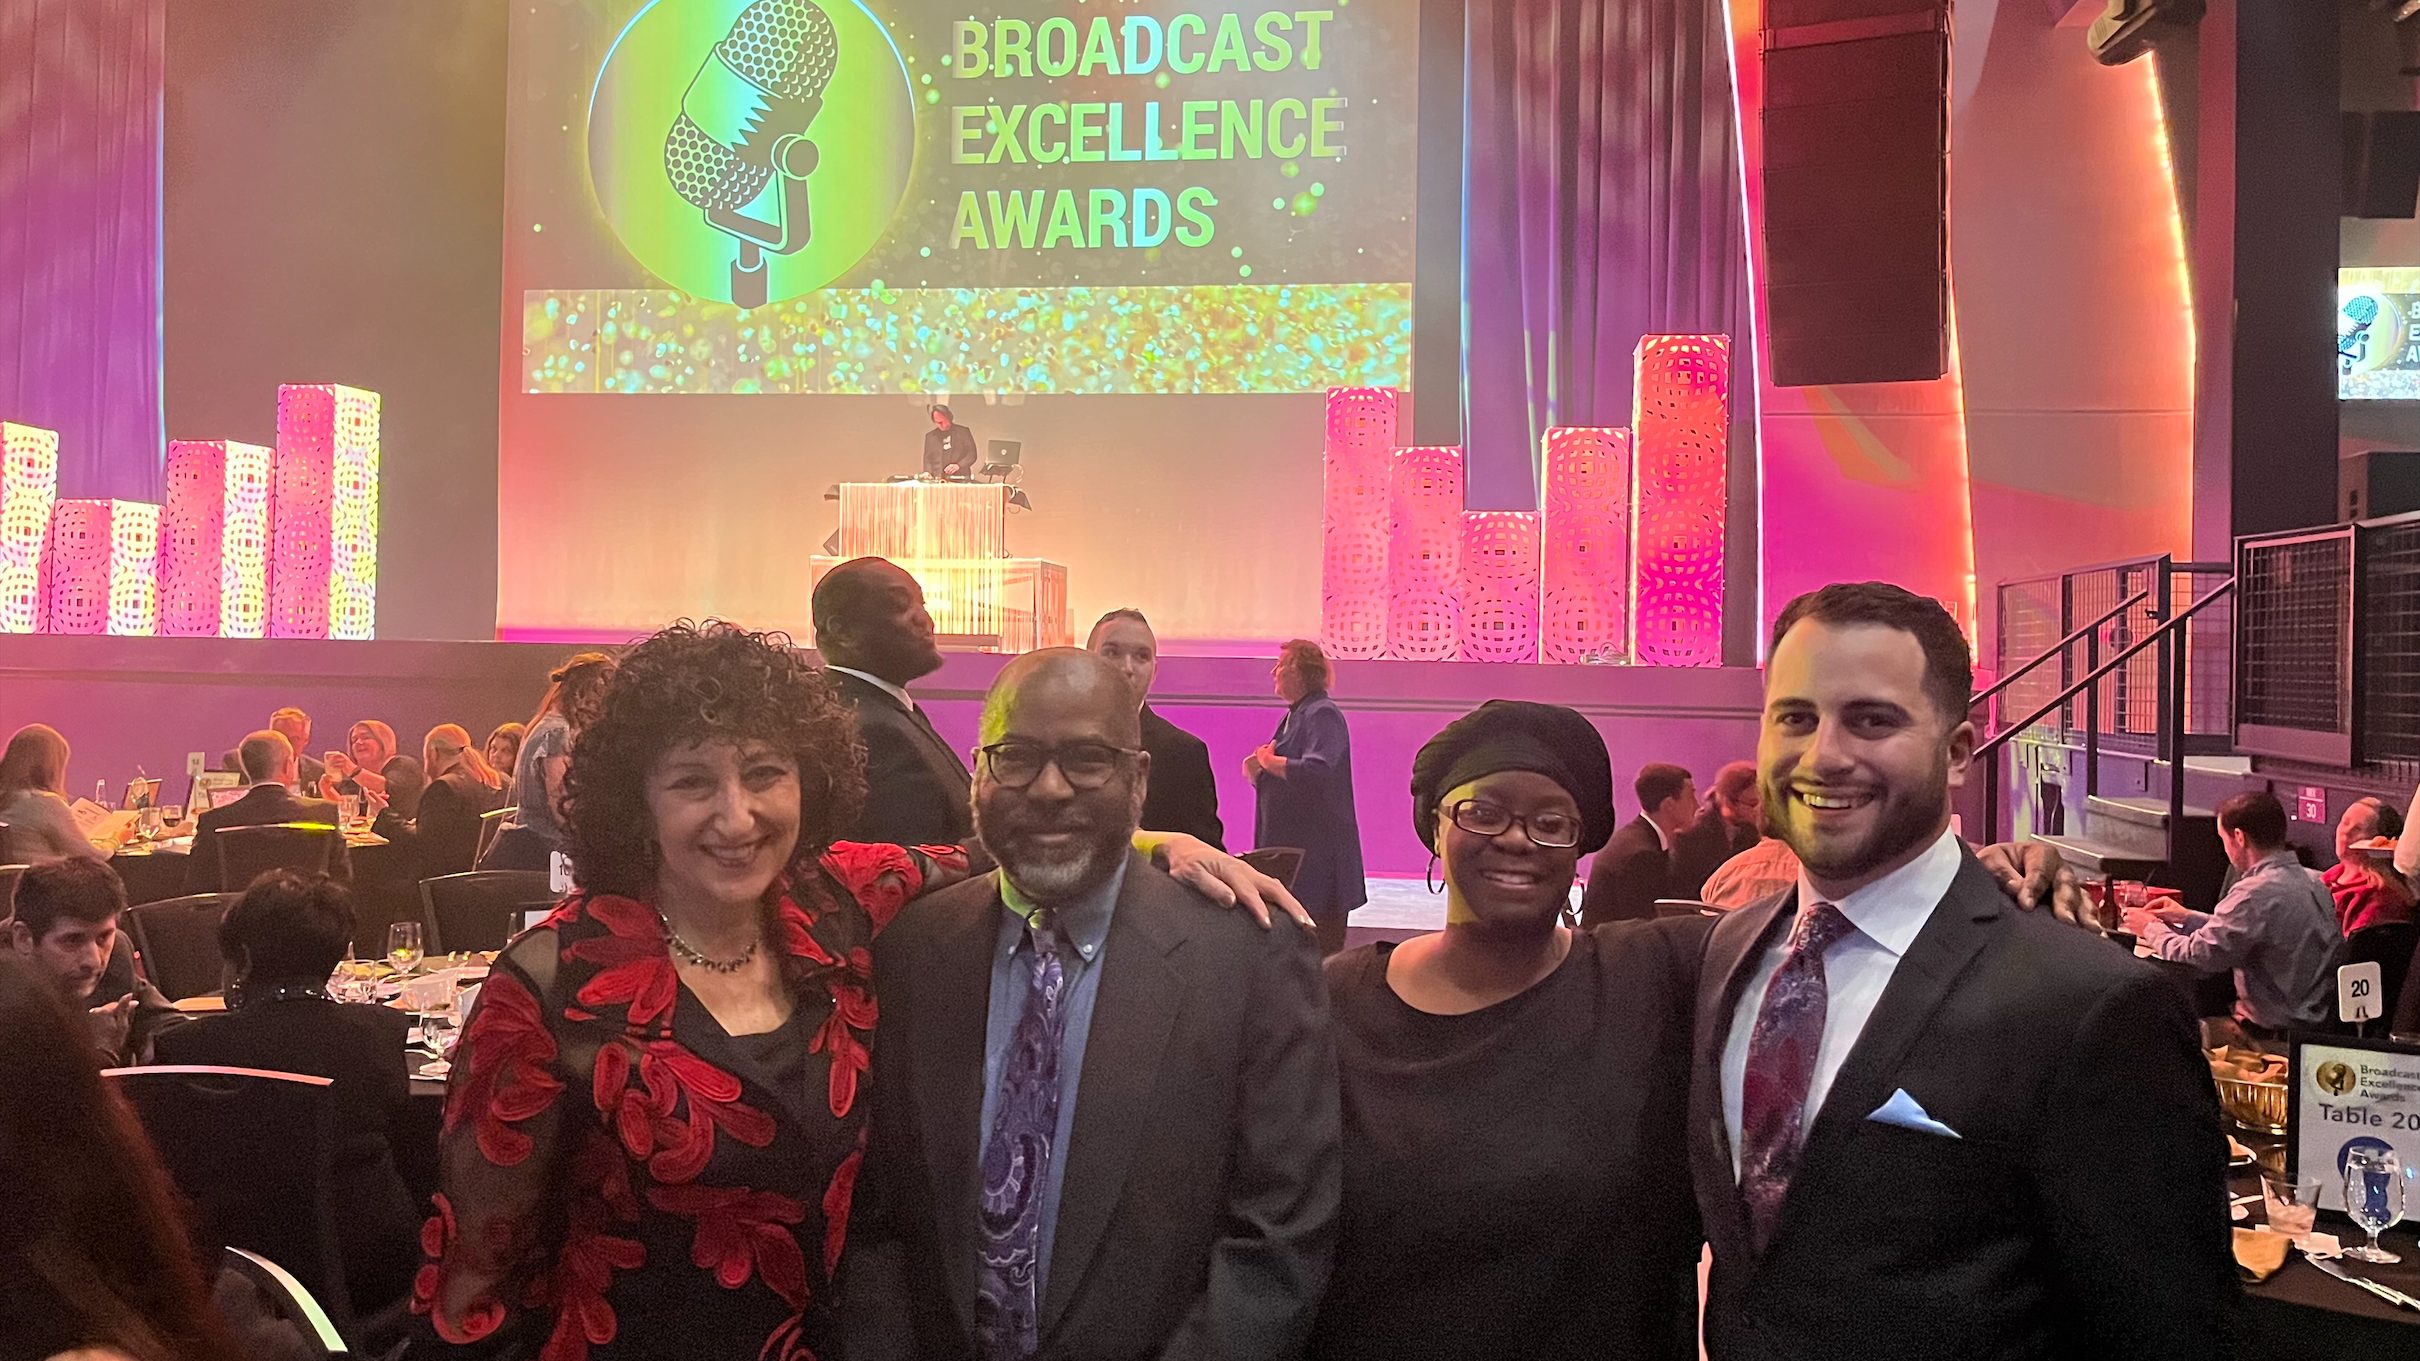 WDET staff members at the Michigan Association of Broadcasters Broadcast Excellence Awards ceremony at Motor City Casino in Detroit, Mich. on April 29, 2023.